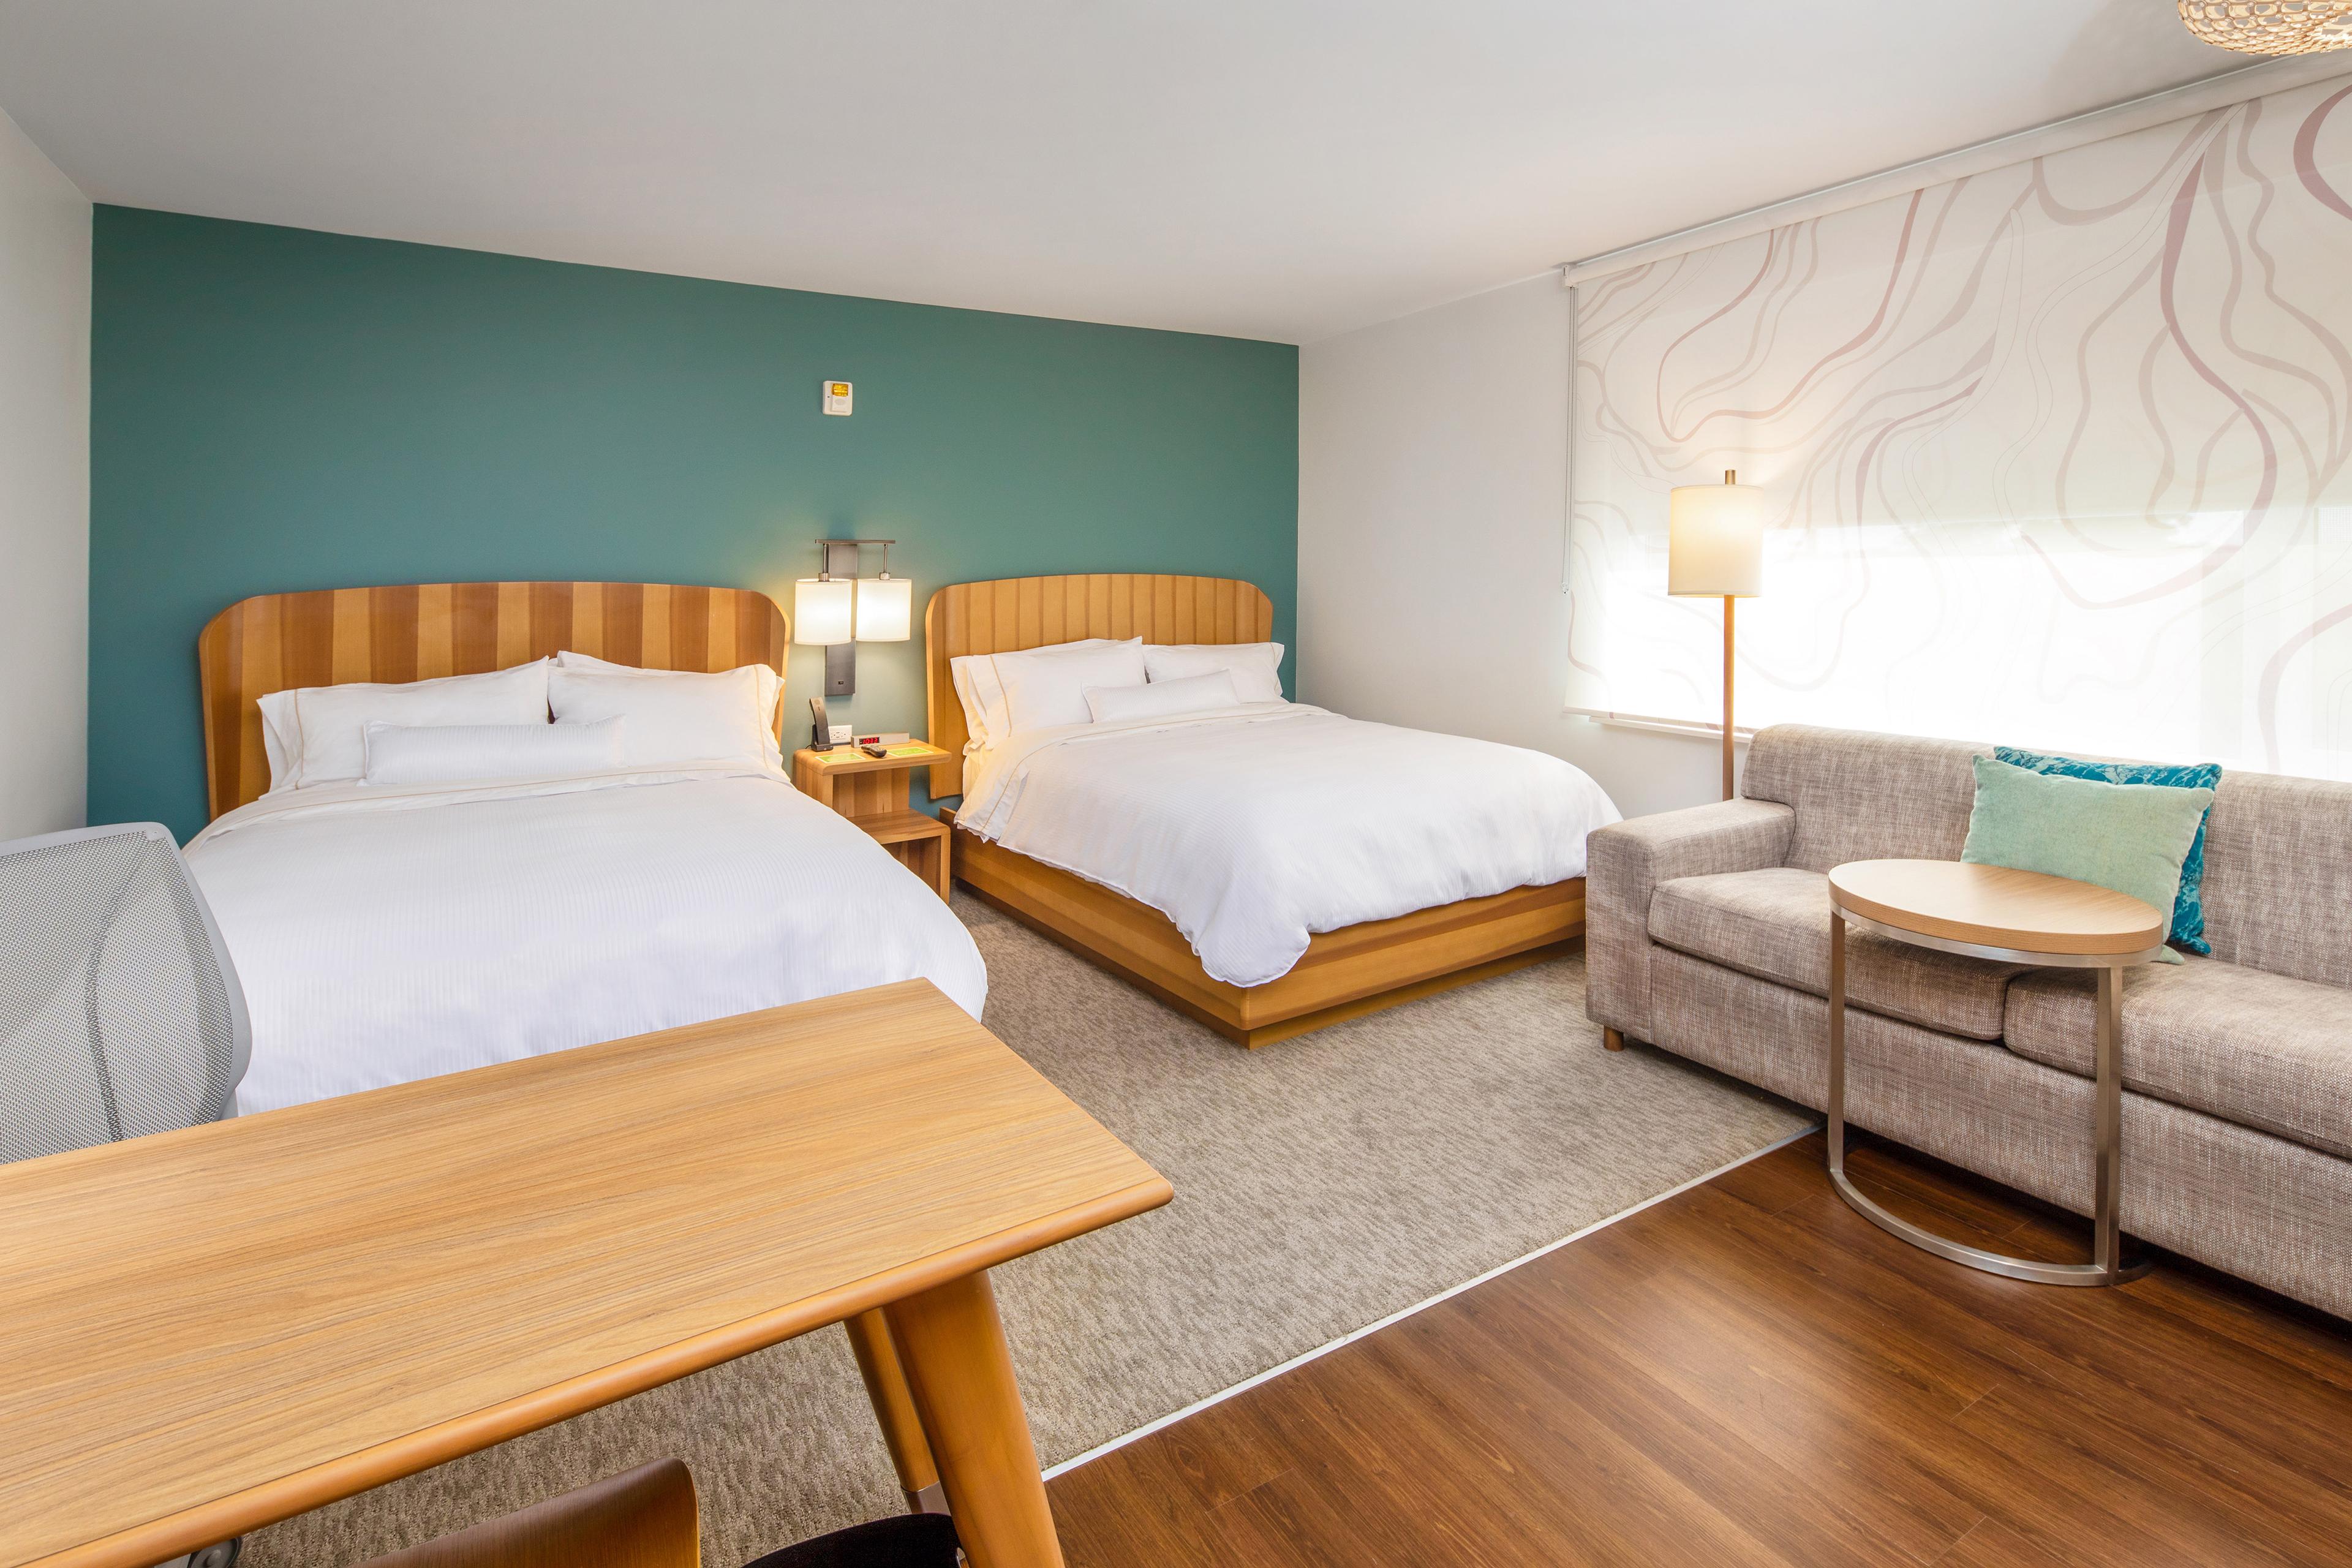 If you're traveling with companions, you'll appreciate our queen/queen studio rooms, featuring large tables, comfy couches and plenty of room for everyone to spread out.